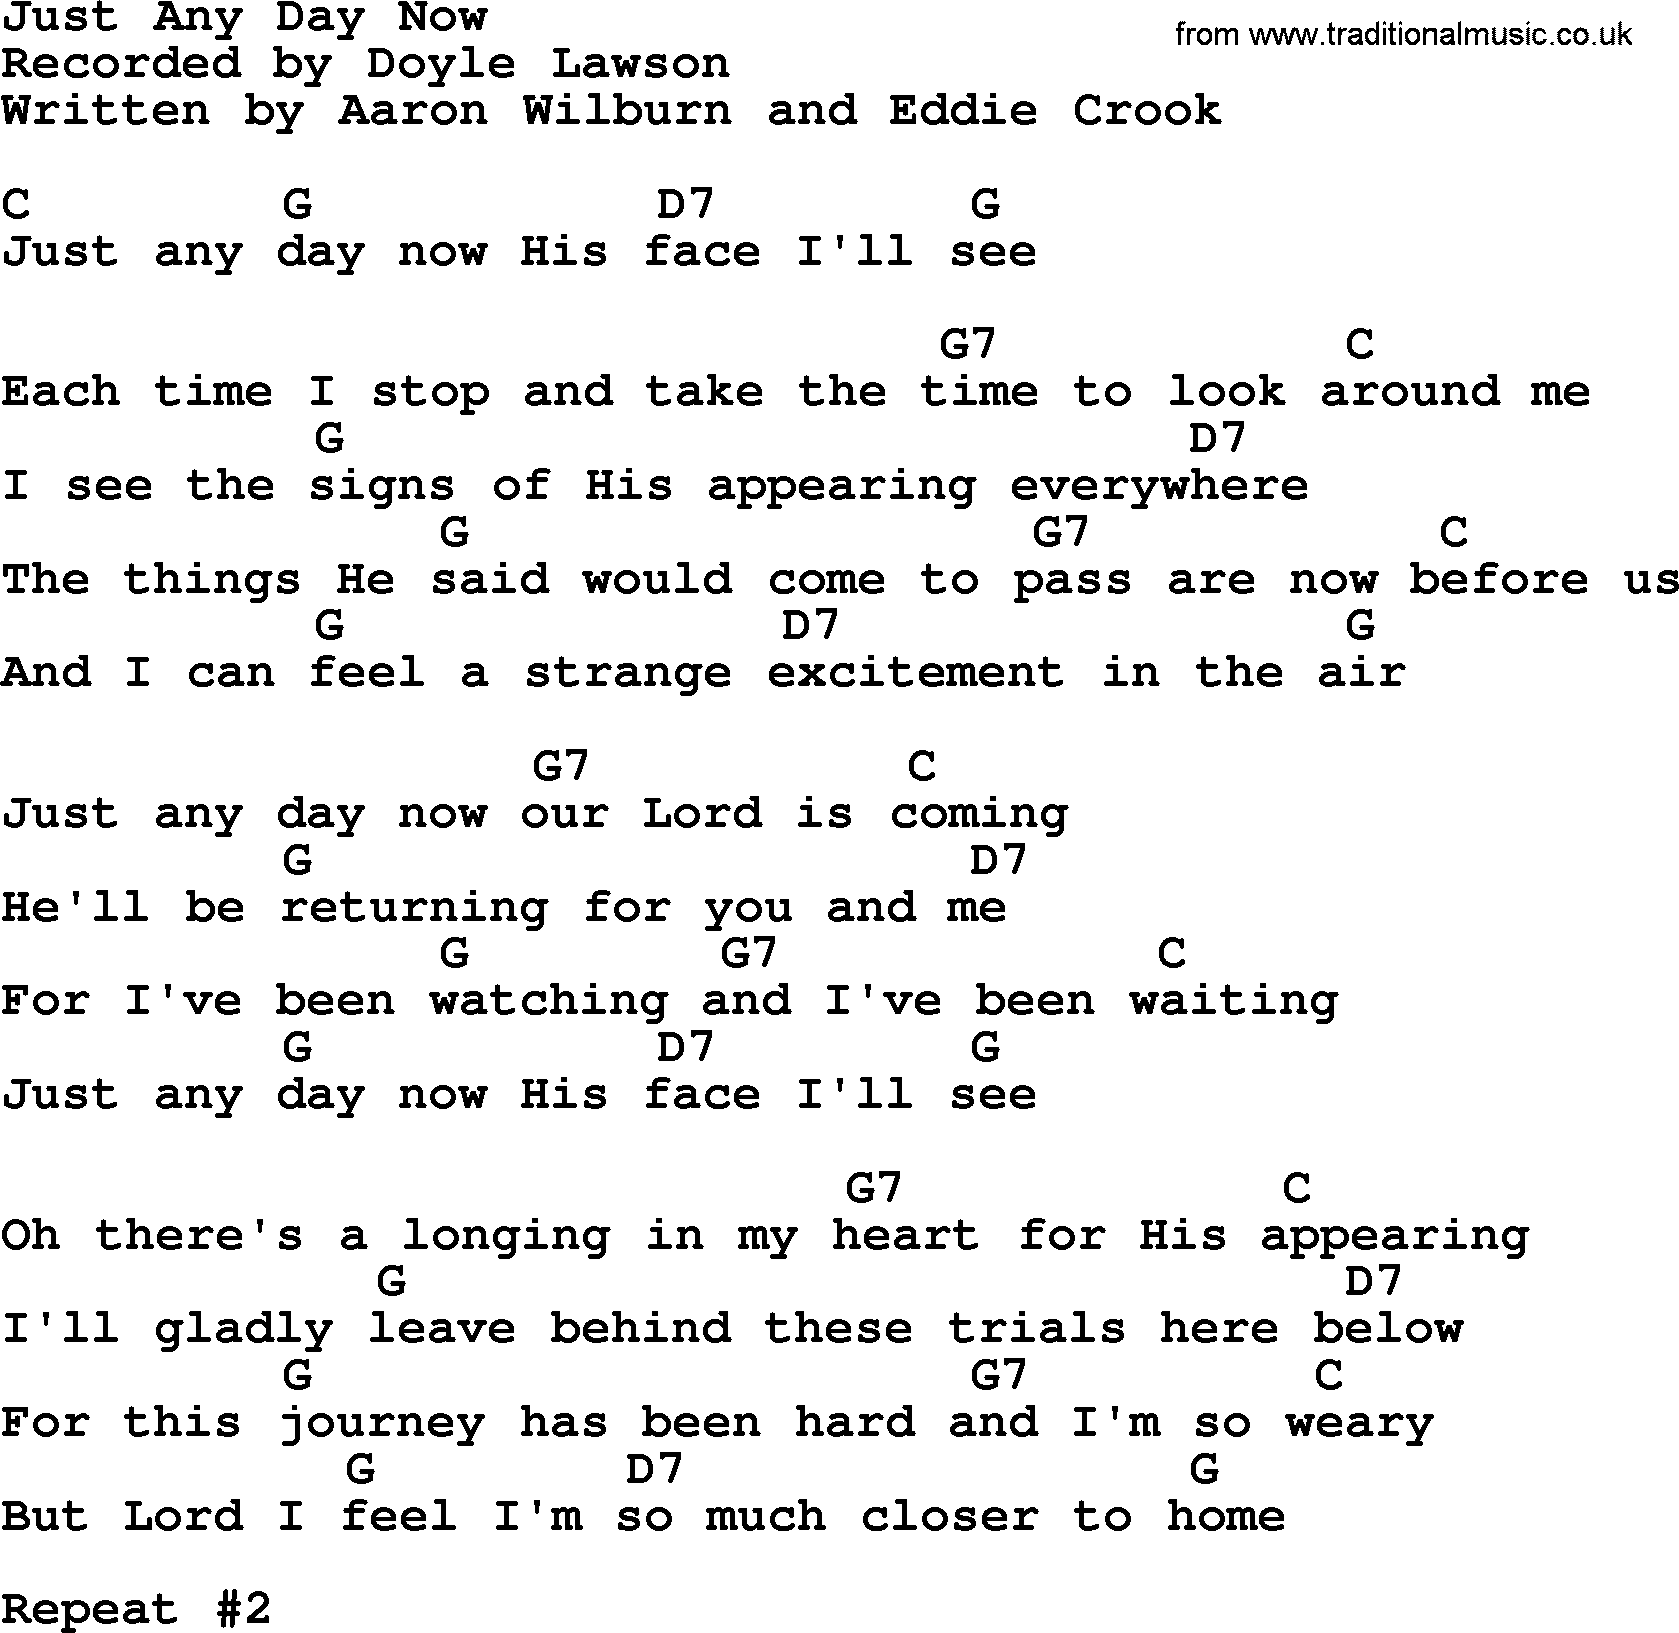 Bluegrass song: Just Any Day Now, lyrics and chords